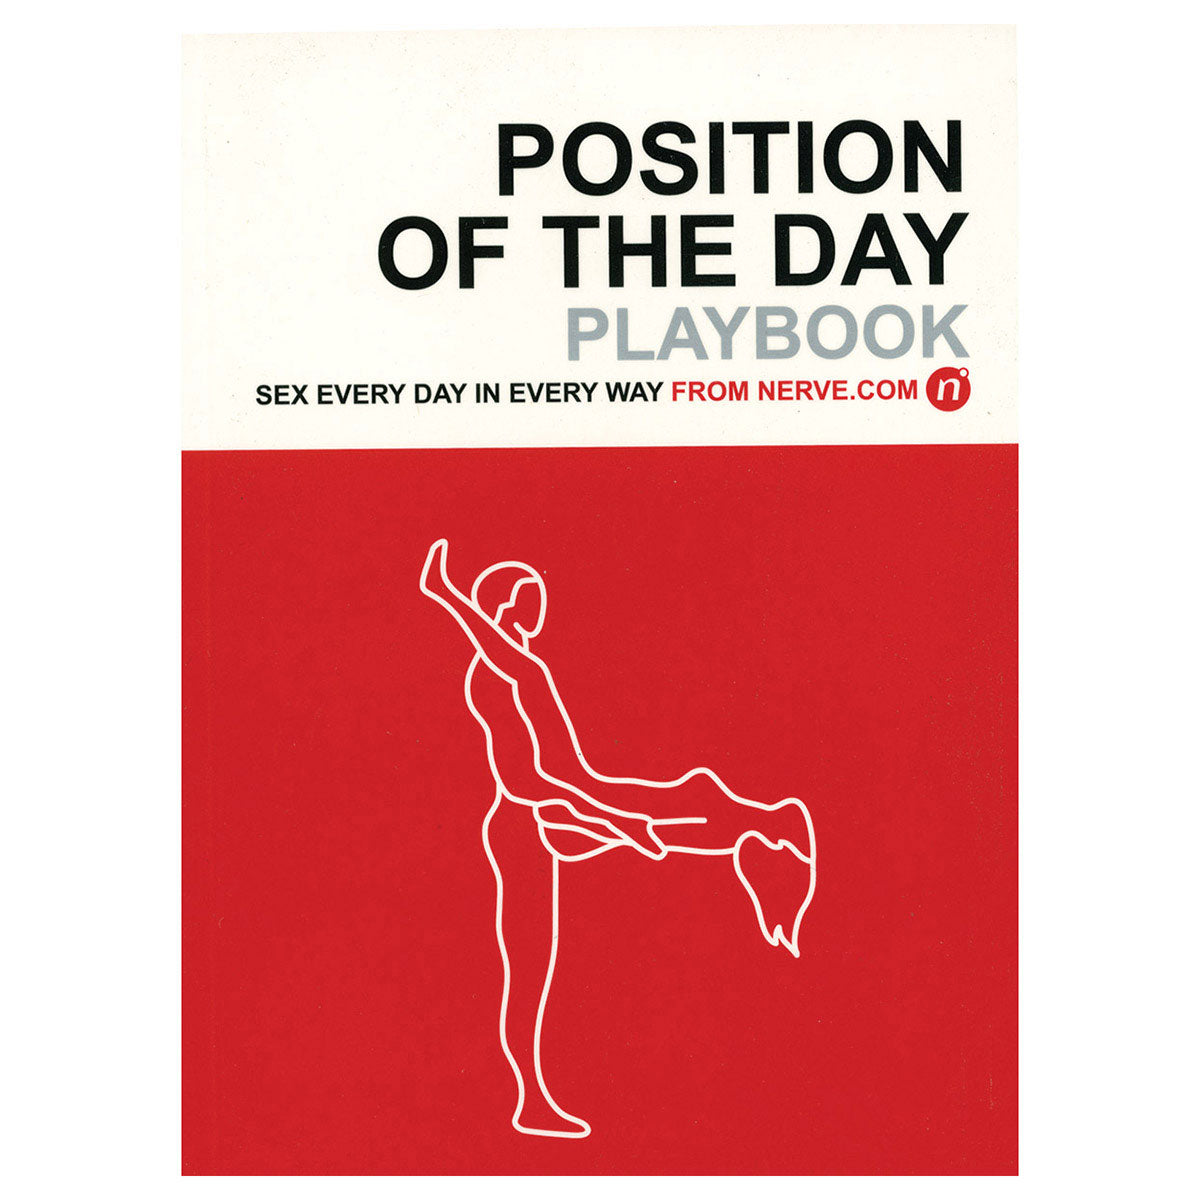 Position of the Day Playbook - Nerve